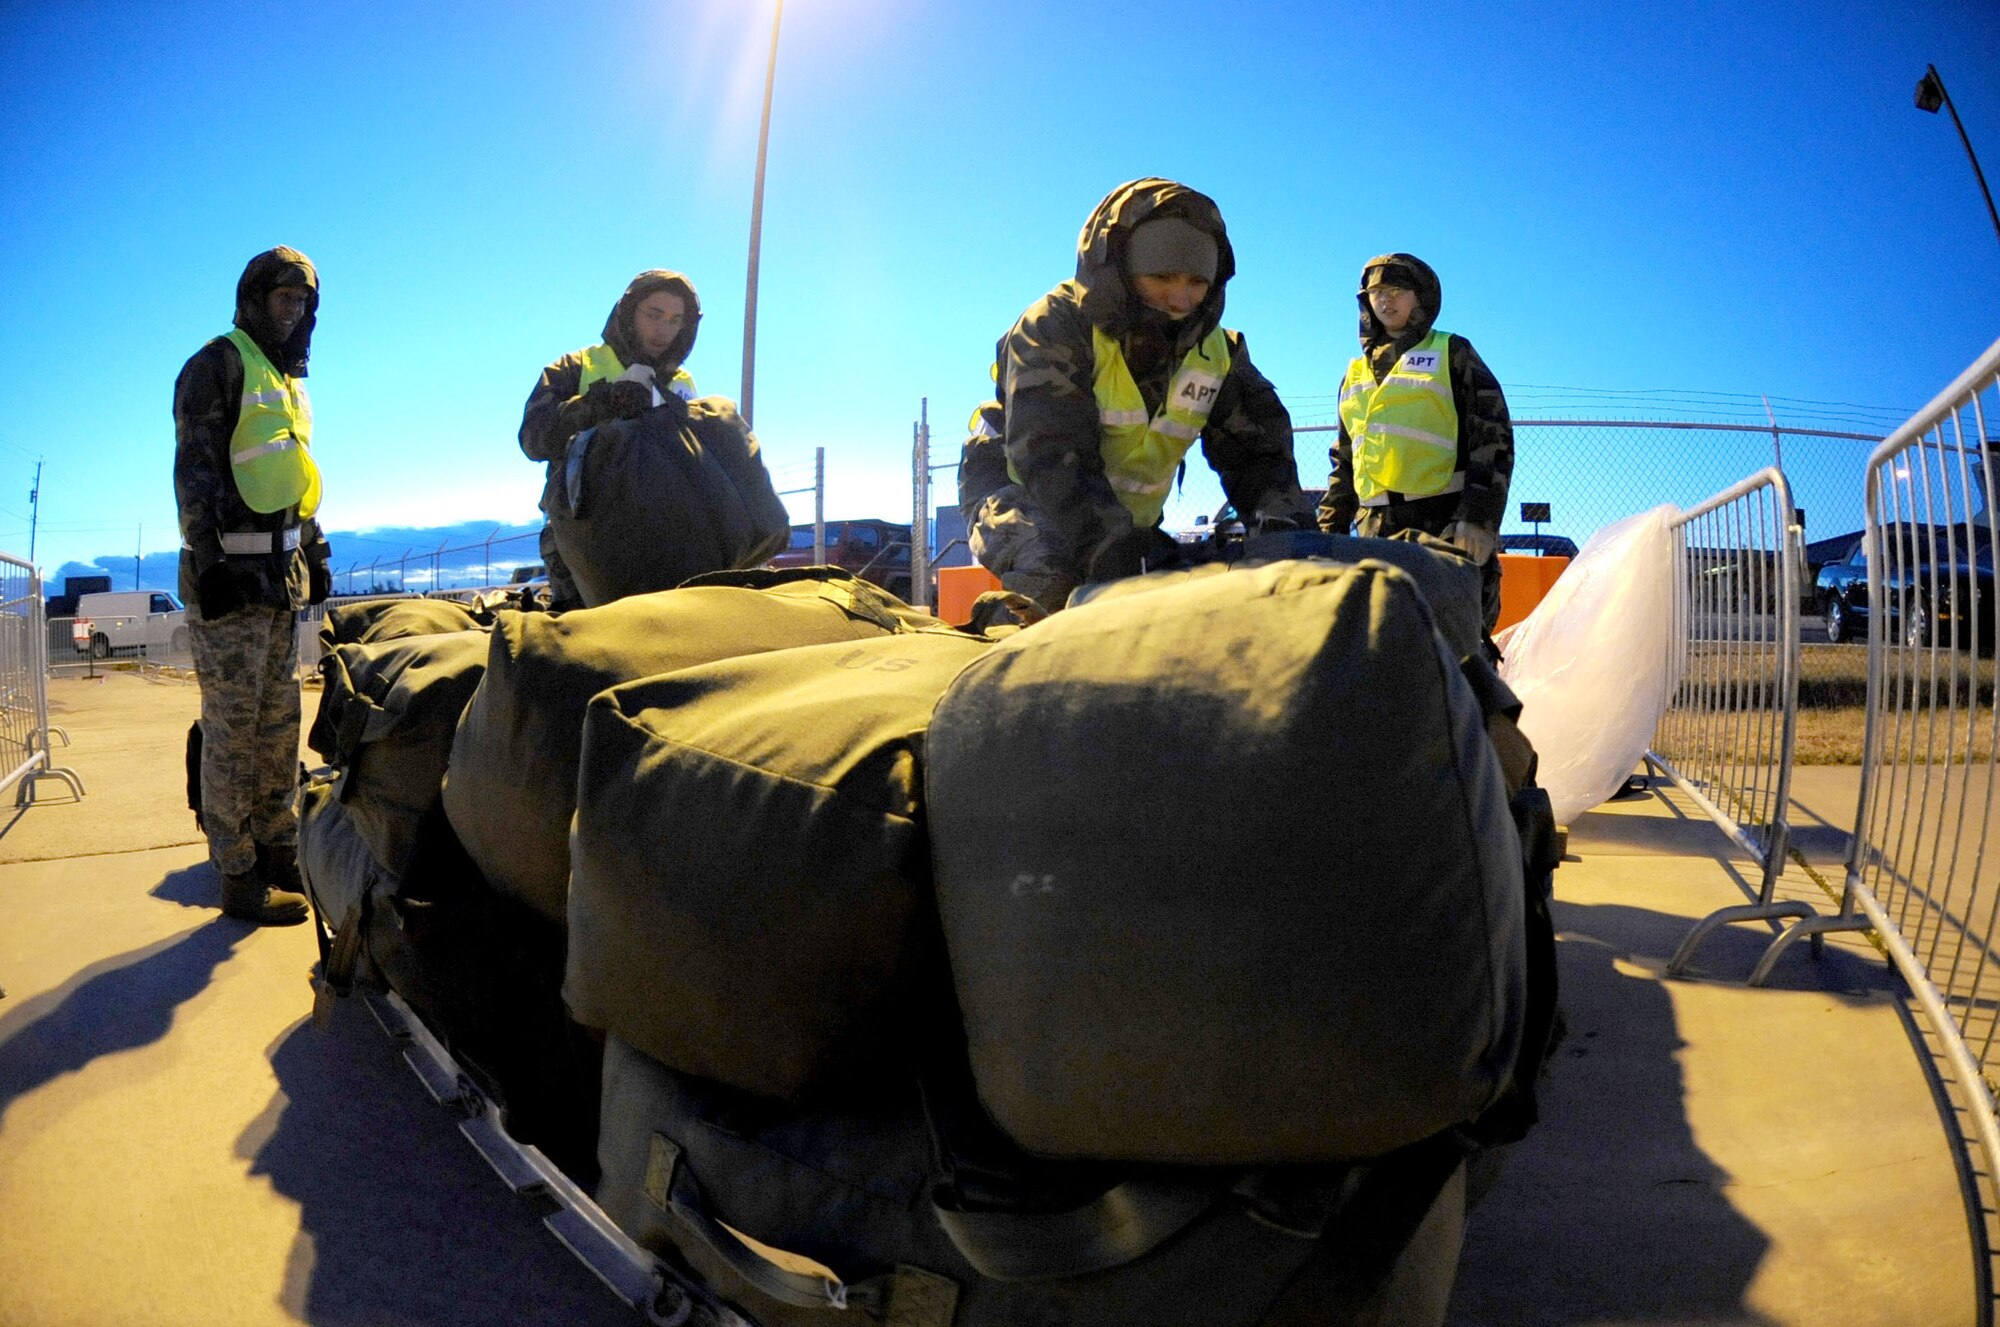 DYESS AIR FORCE BASE, Texas -- 7th Bomb Wing members palletize mobility bags of deploying personnel during the operational readiness inspection here, Jan. 6. Bags are palletized for safe transportation on military aircraft.  (U.S. Air Force photo by Senior Airman Domonique Simmons)